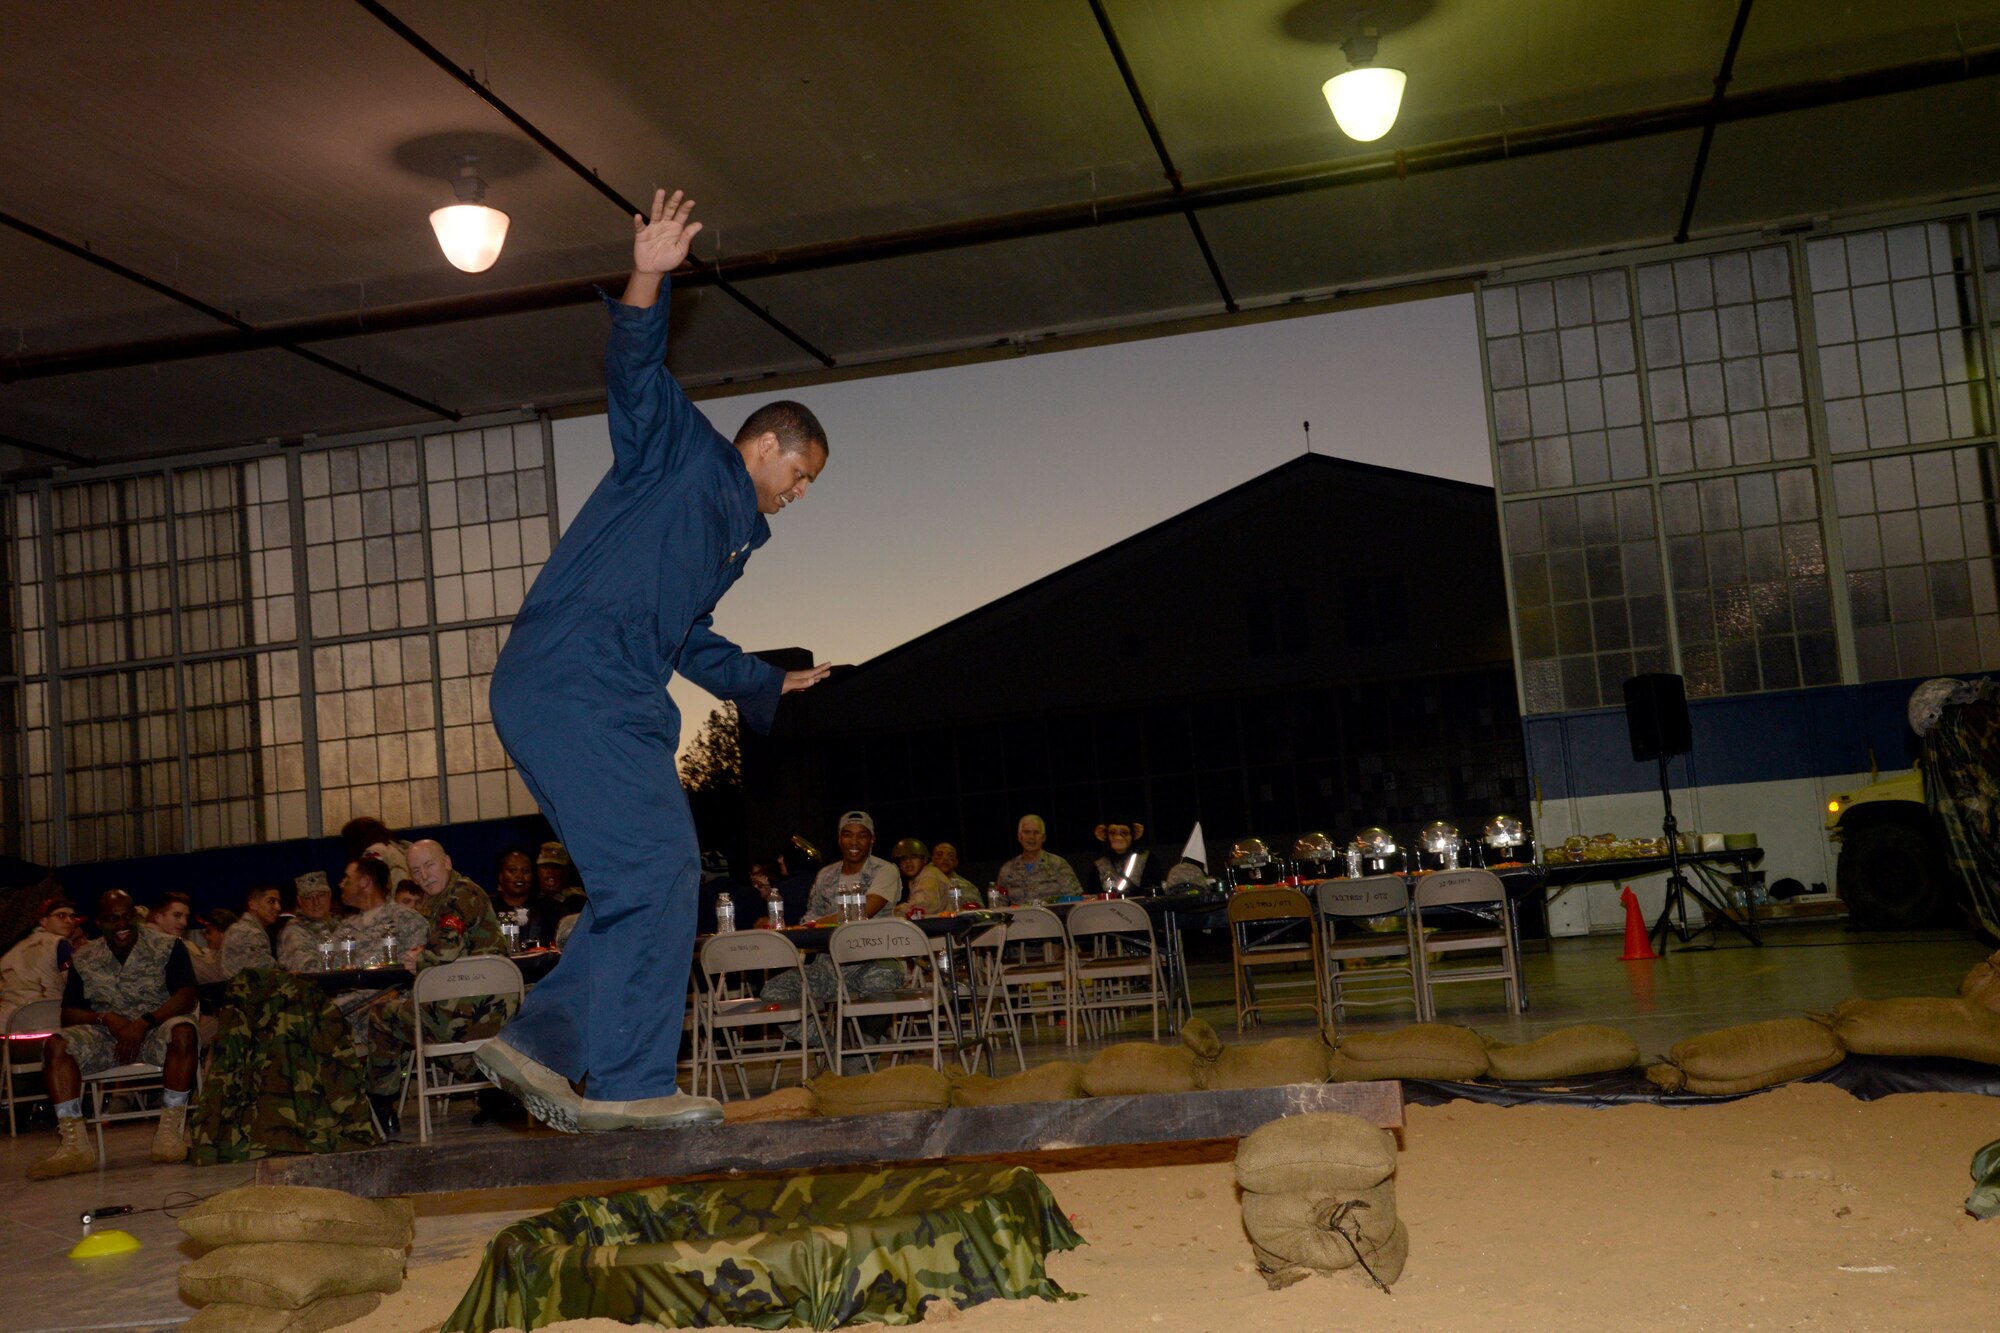 A Maxwell Combat Dining-In attendee maintains his balance while maneuvering though an obstacle course during the event, Nov. 4, 2016, Maxwell Air Force Base, Ala. The remainder of the obstacle course included low crawling and jump roping. (U.S. Air Force photo/ Senior Airman Alexa Culbert)

